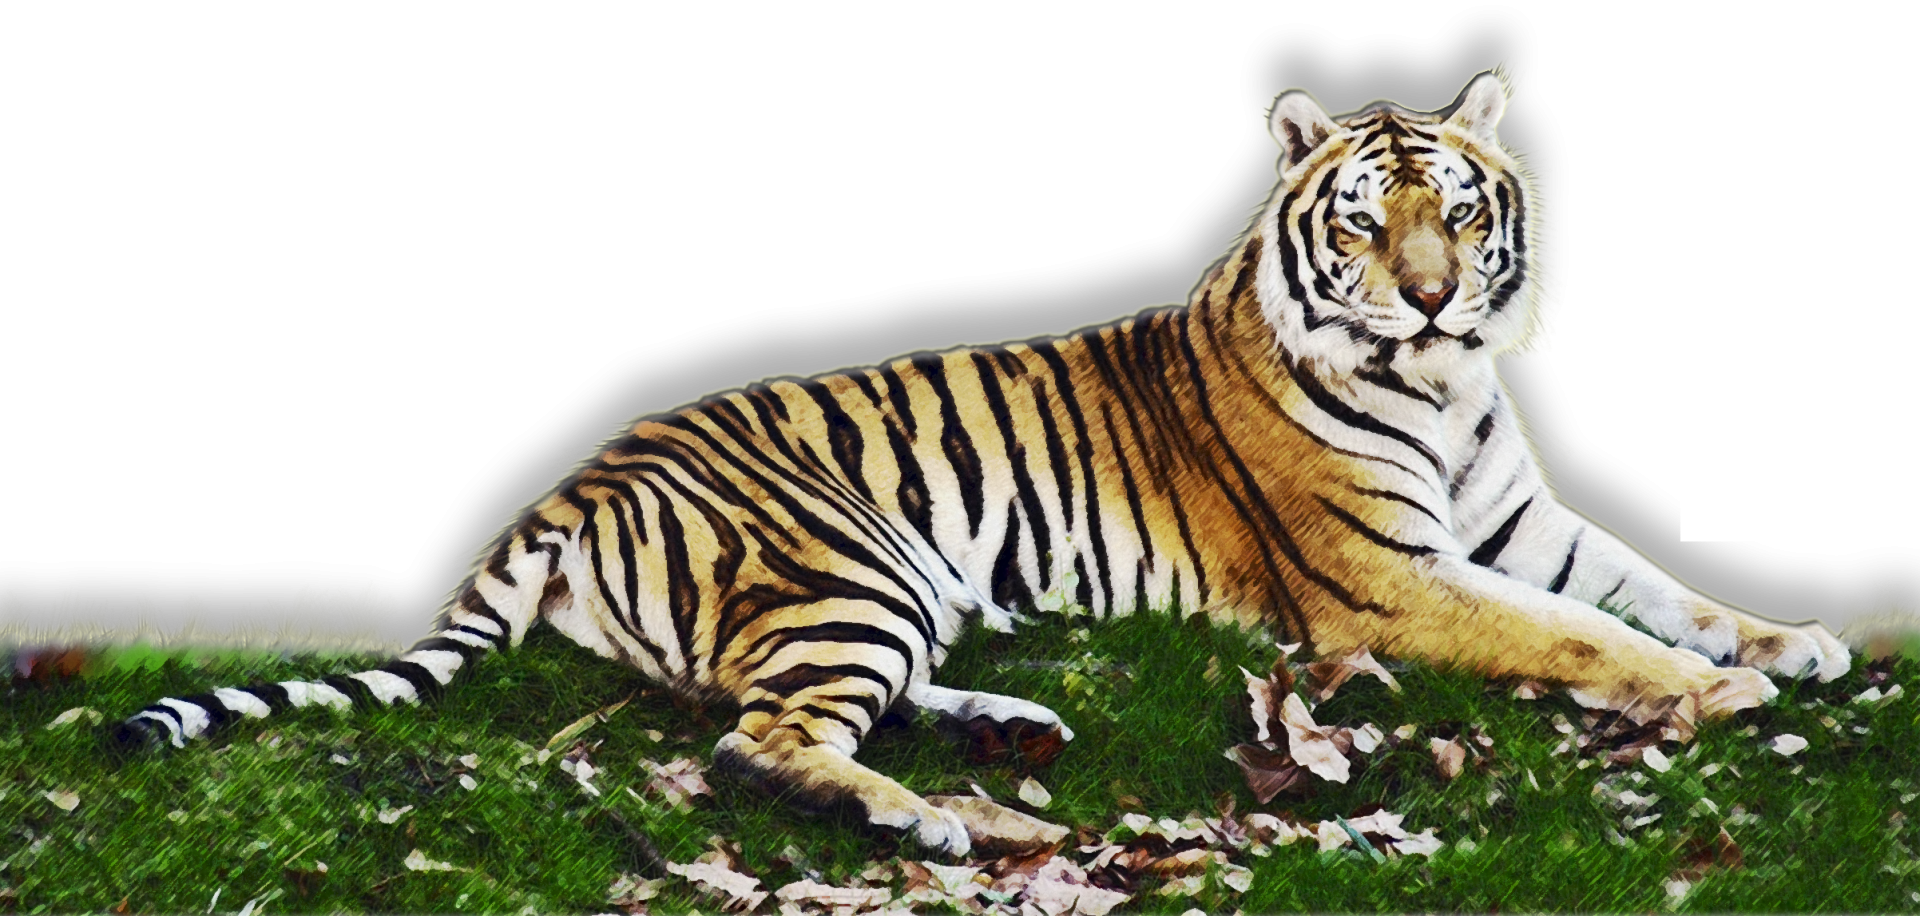 Tiger Art Lying In The Grass